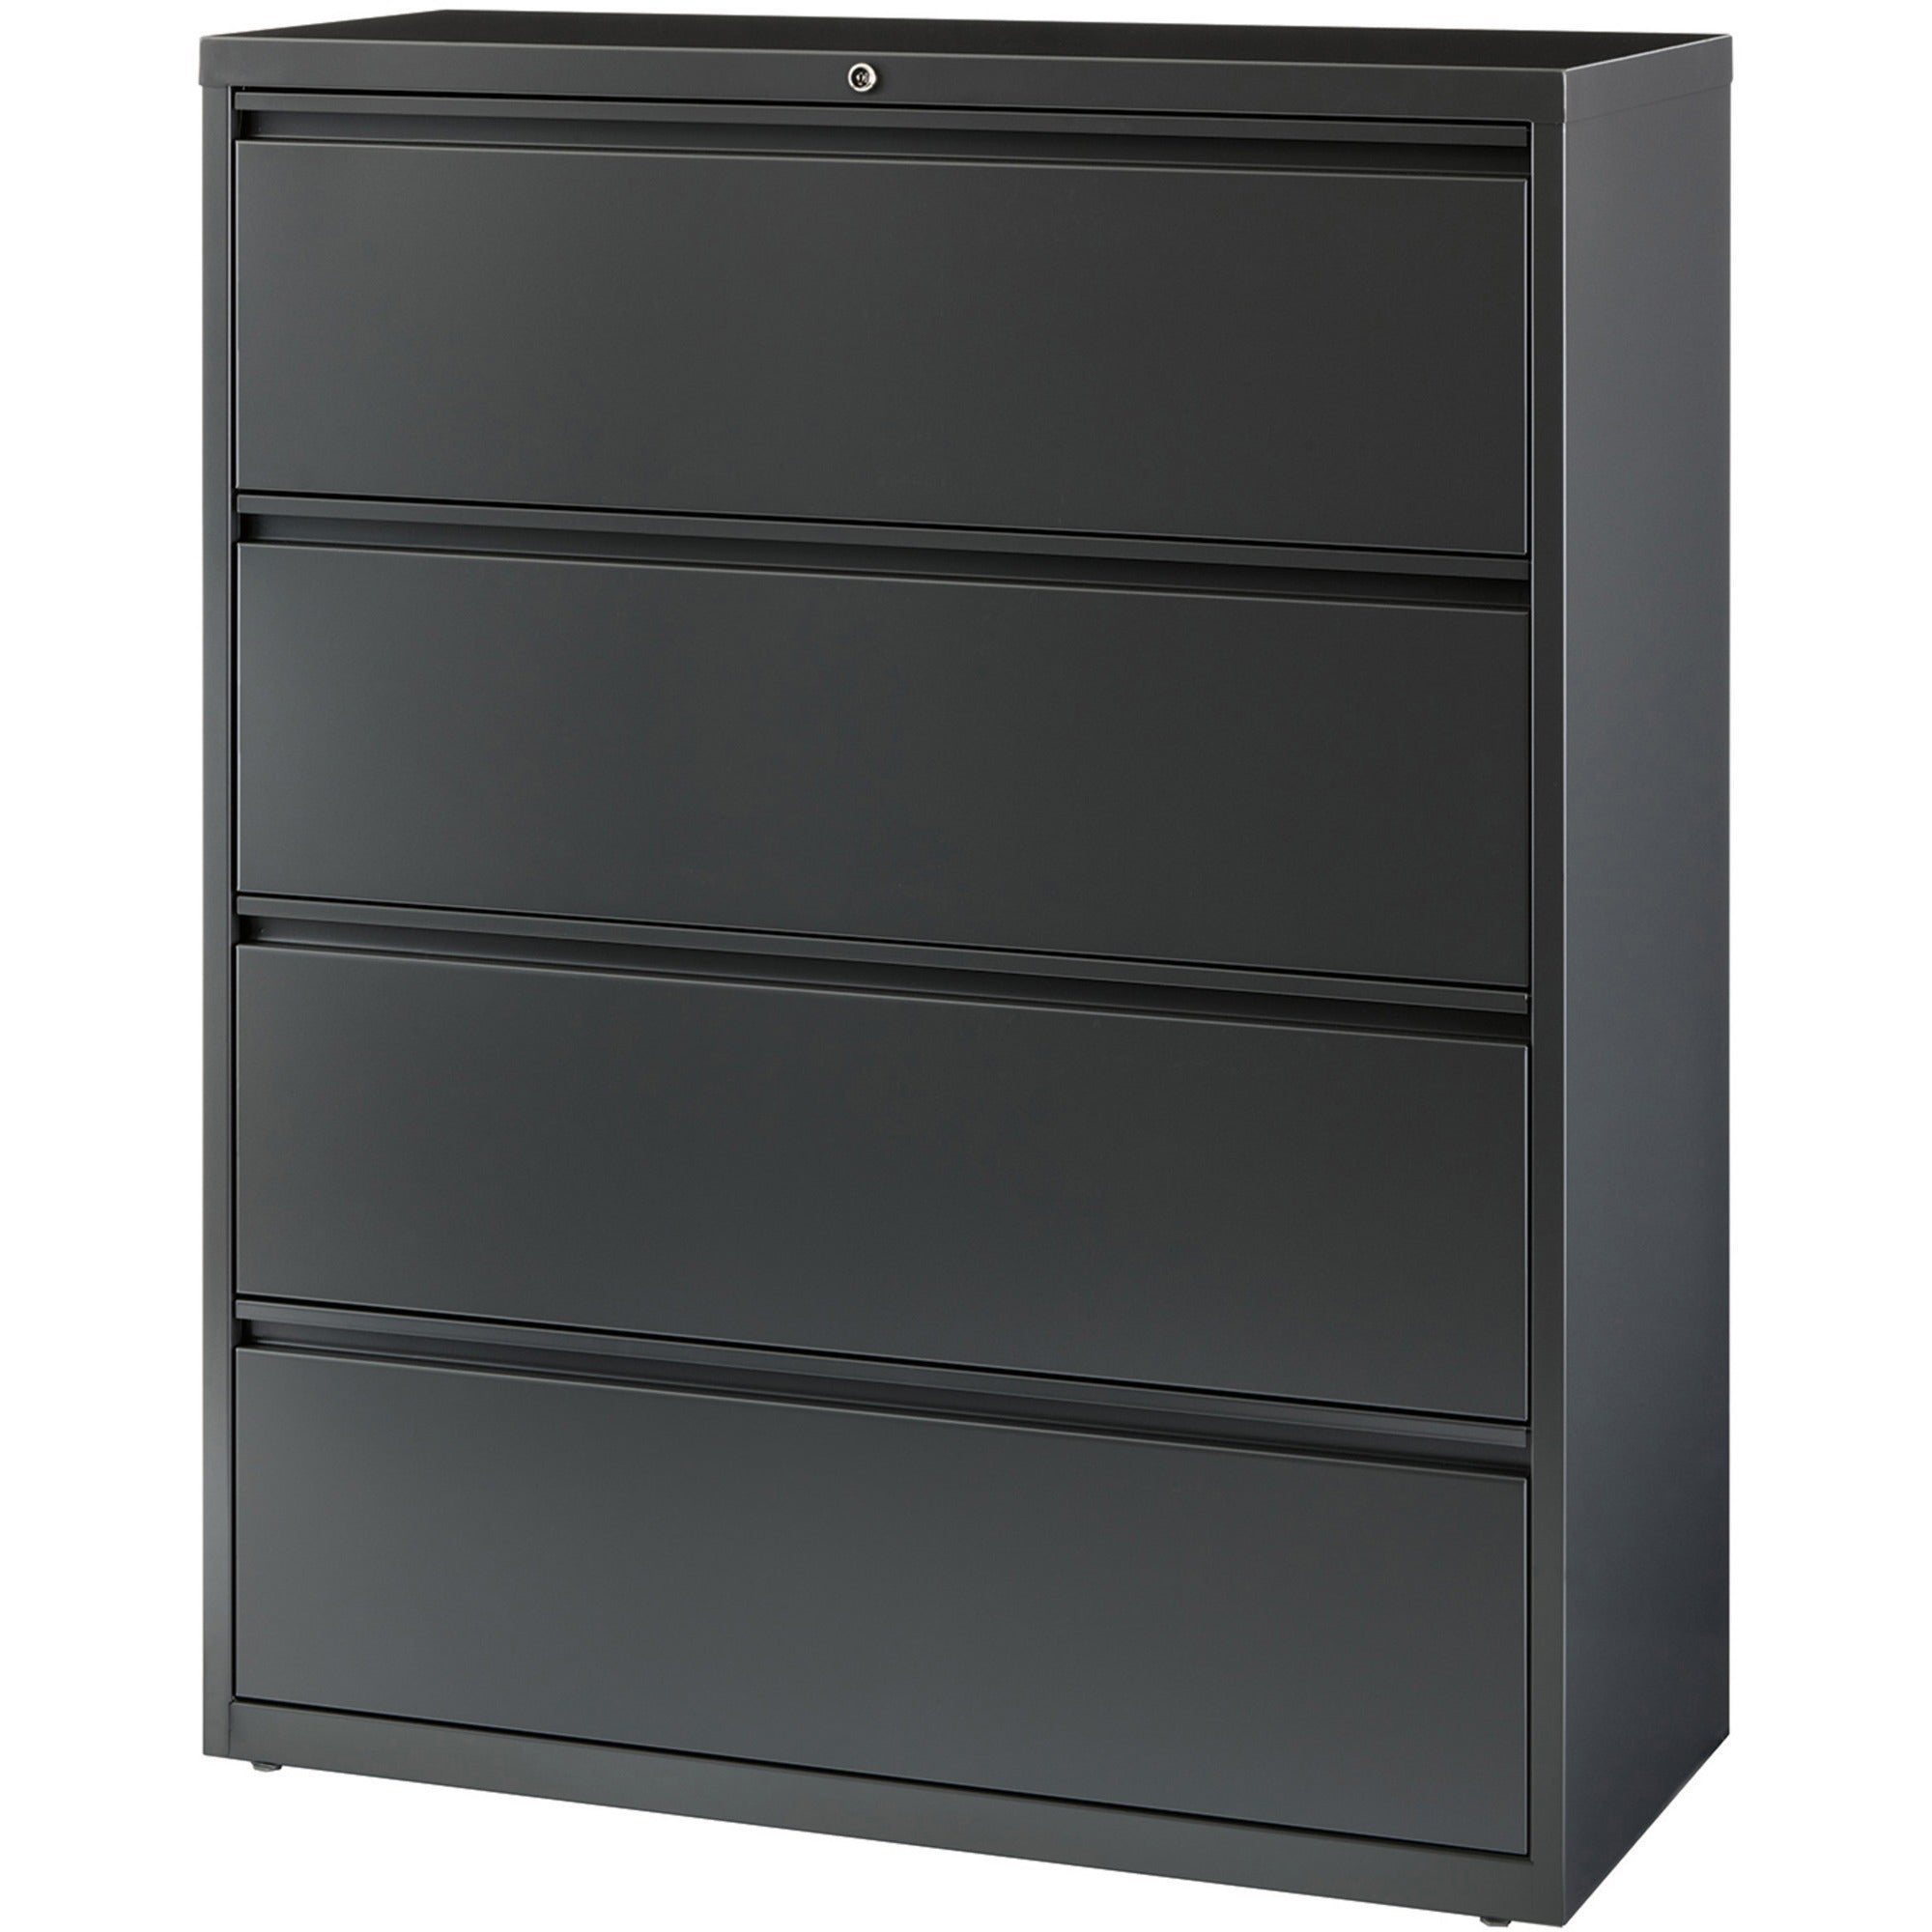 Lorell Fortress Series Lateral File - 42" x 18.6" x 52.5" - 4 x Drawer(s) - Legal, Letter, A4 - Lateral - Rust Proof, Leveling Glide, Interlocking, Reinforced, Hanging Rail - Charcoal - Baked Enamel - Steel - Recycled - 